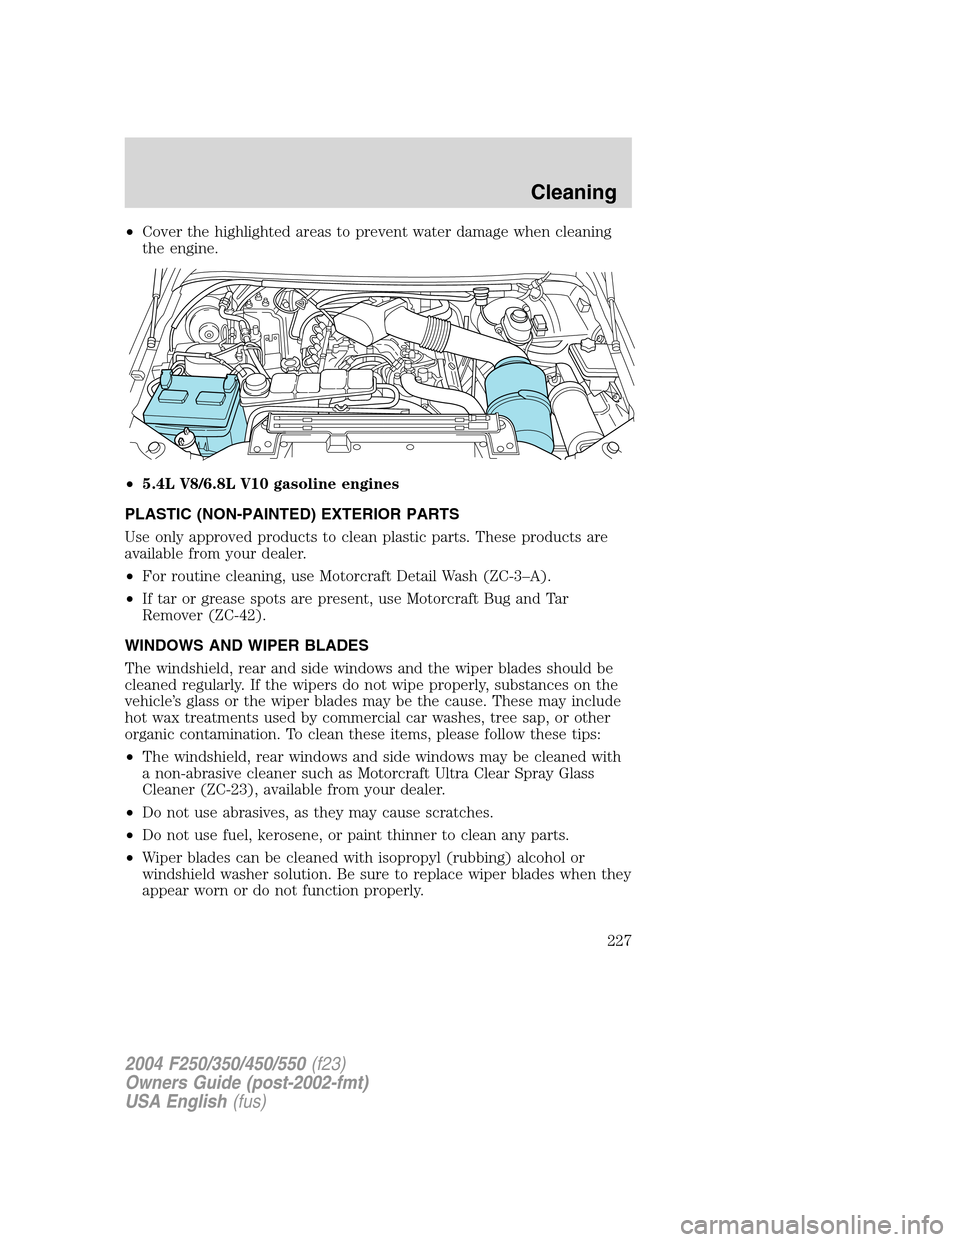 FORD SUPER DUTY 2004 1.G Owners Manual •Cover the highlighted areas to prevent water damage when cleaning
the engine.
•5.4L V8/6.8L V10 gasoline engines
PLASTIC (NON-PAINTED) EXTERIOR PARTS
Use only approved products to clean plastic p